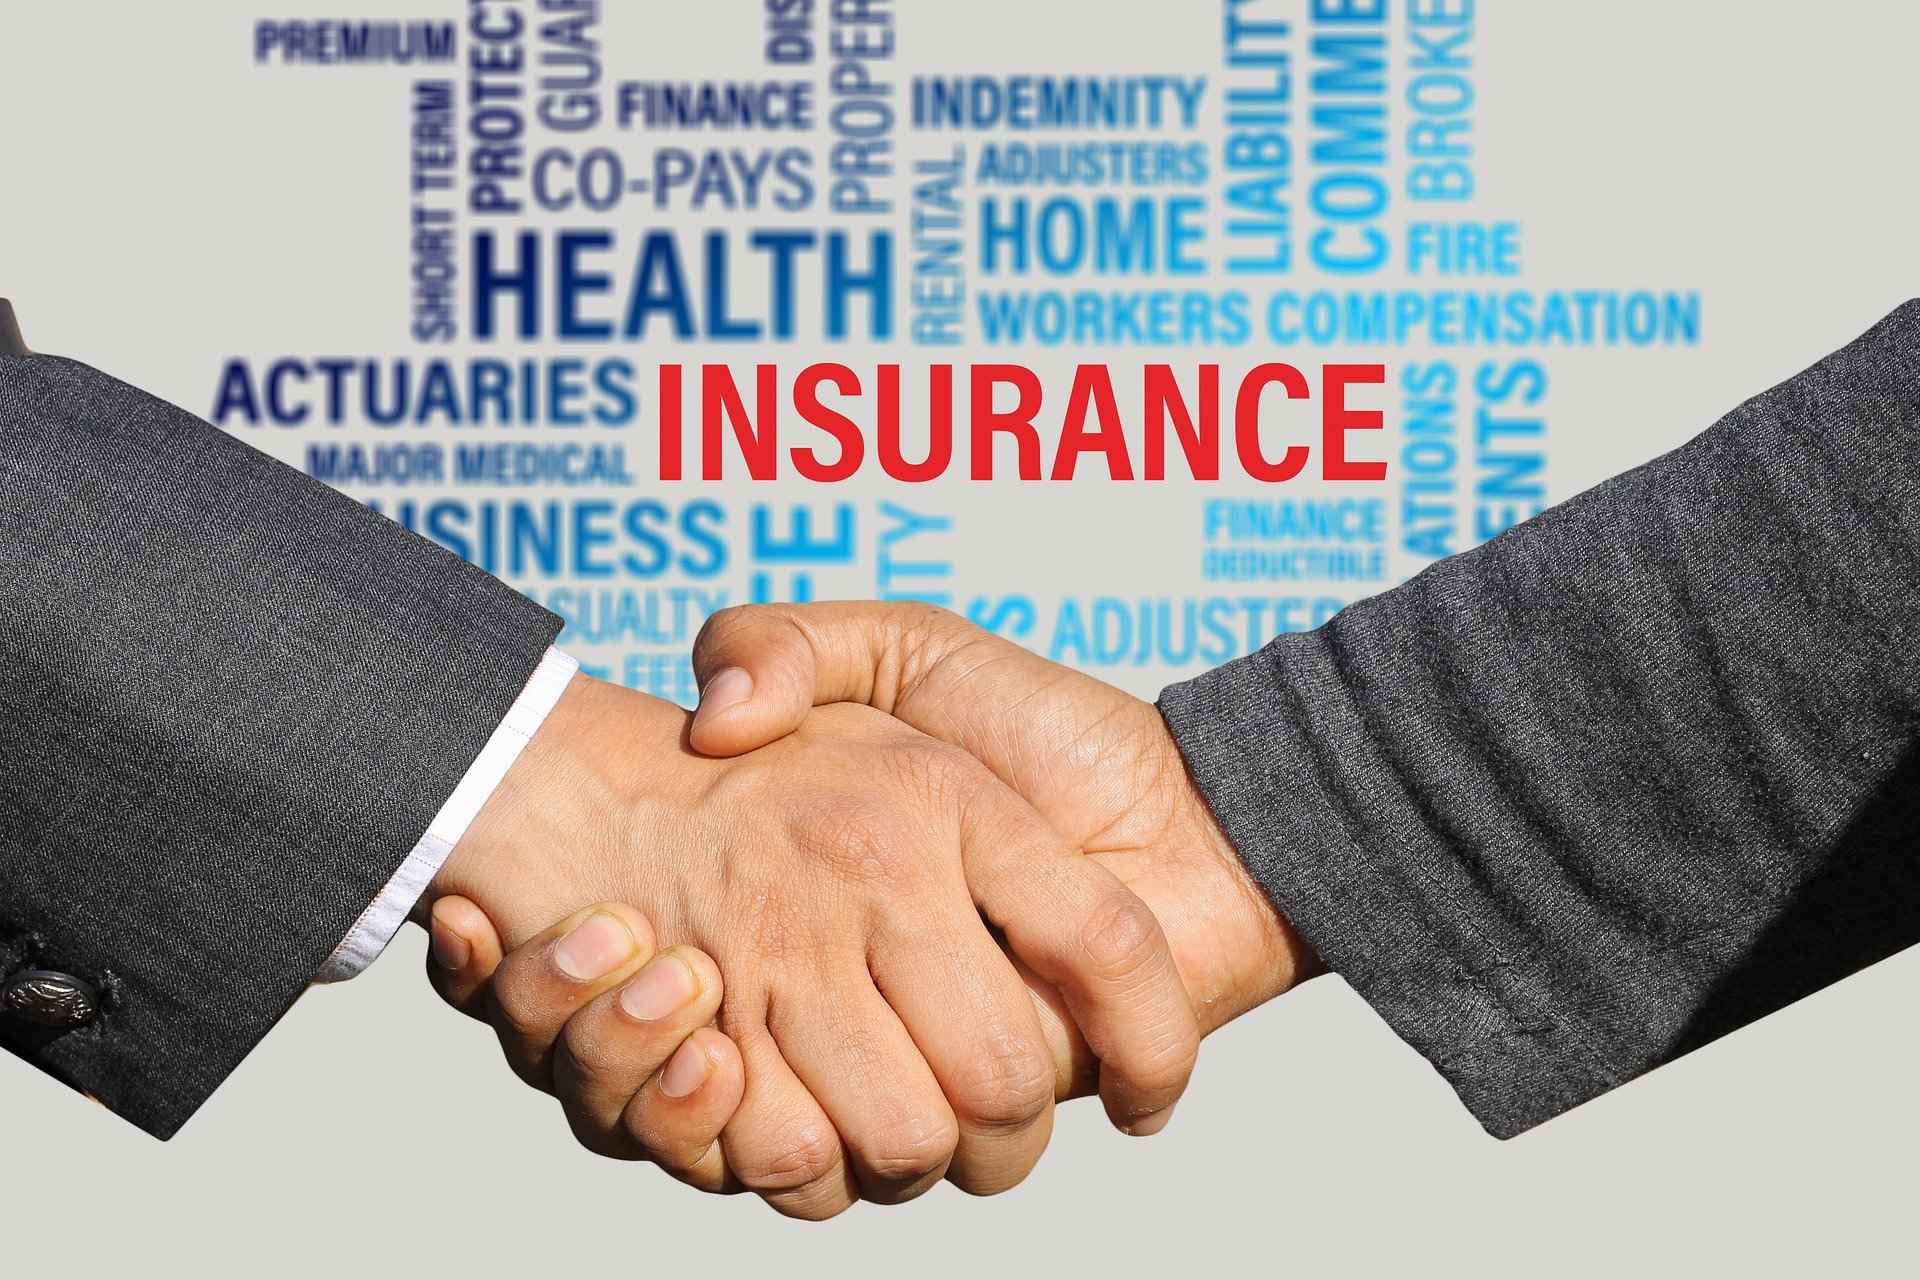 Understanding Insurance Terminology: Premium, Deductible, Policy Limit, Coverage, Exclusions